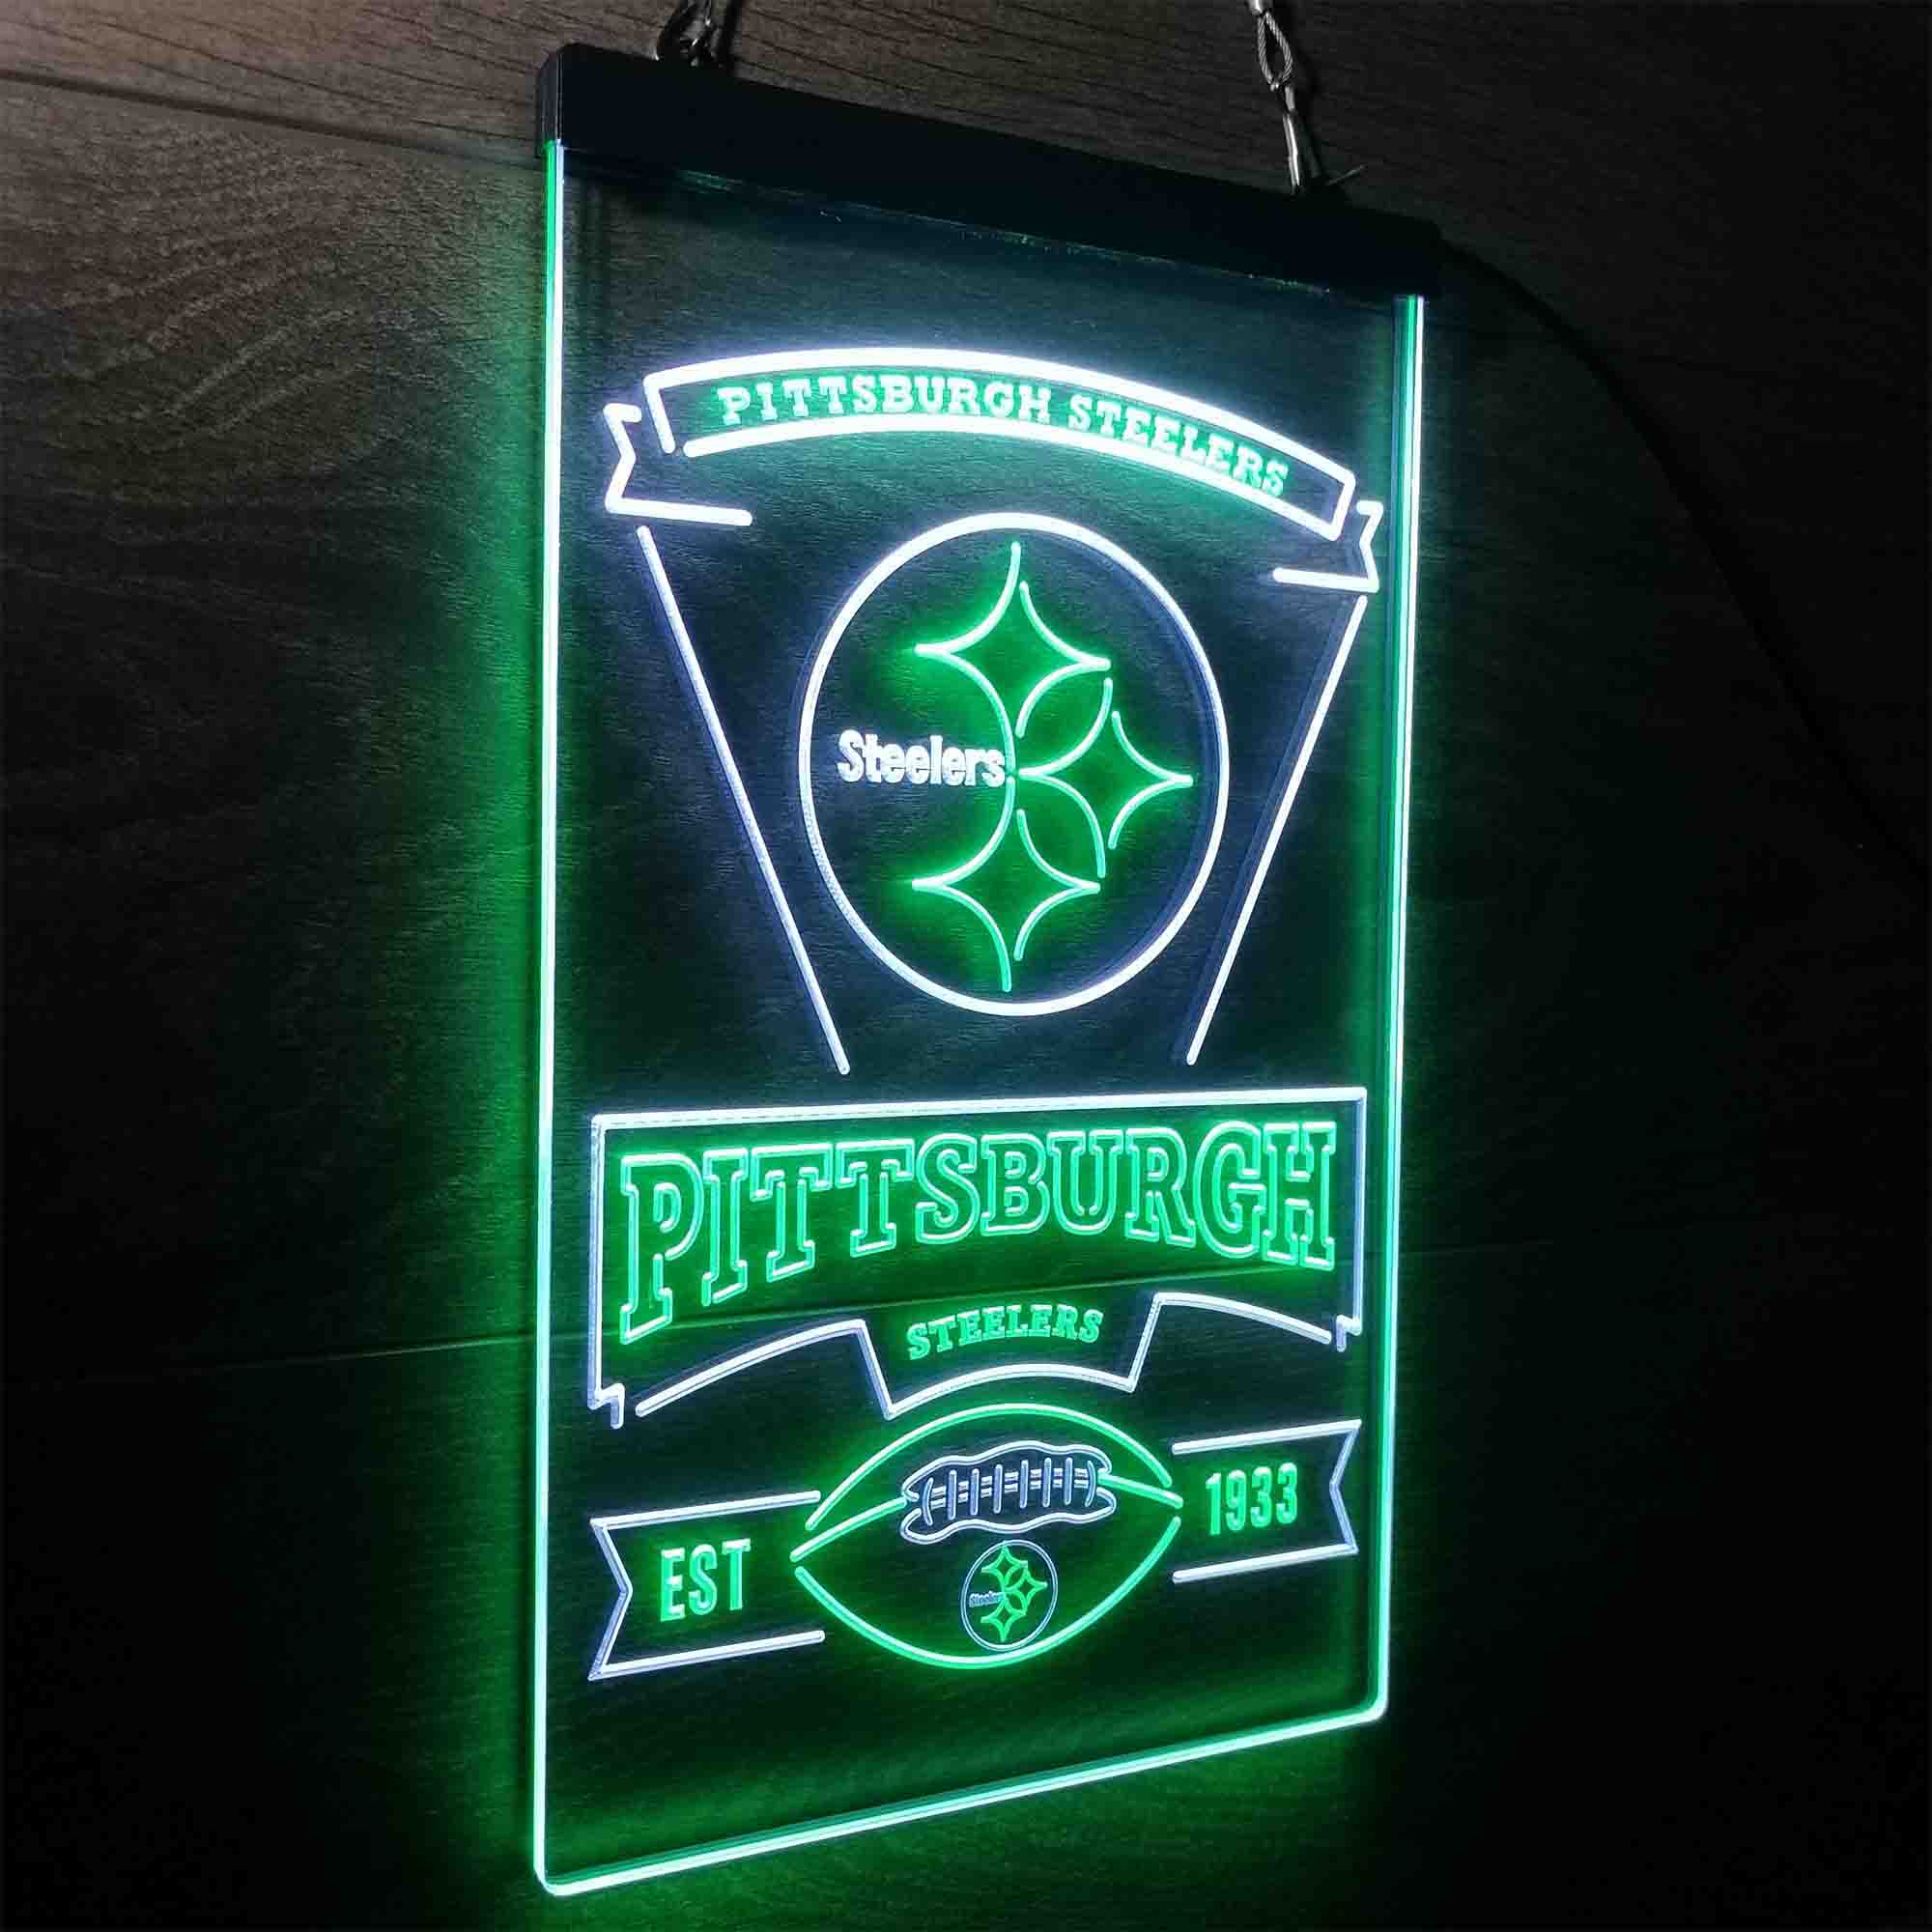 Pittsburgh Steelers Est. 1933 LED Neon Sign